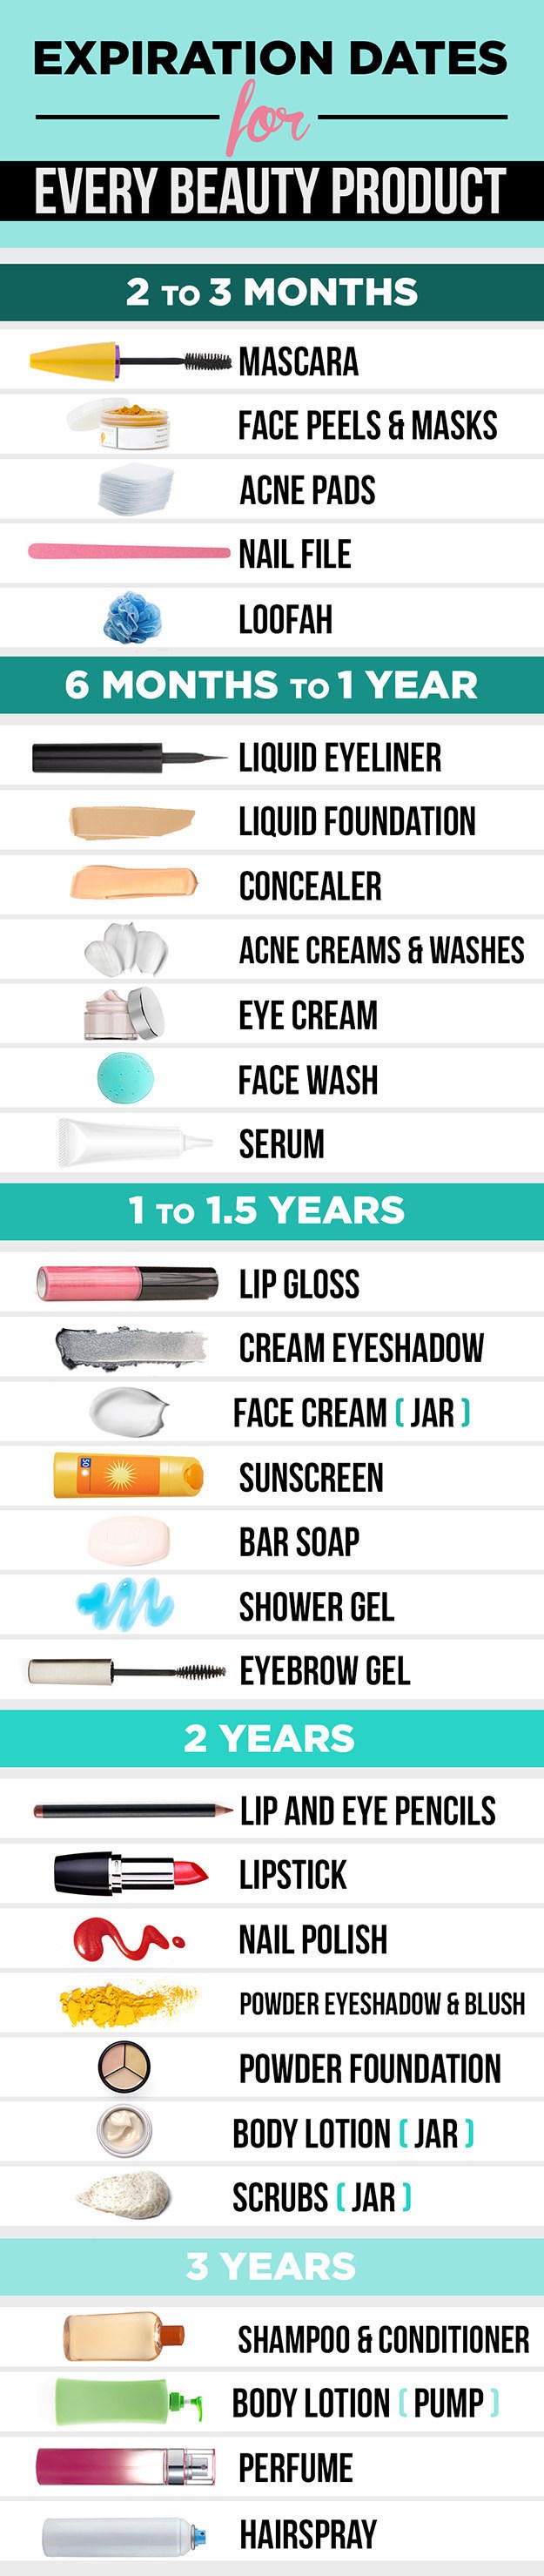 Finally, keep in mind it may be time to start tossing some of the products in your makeup bag.